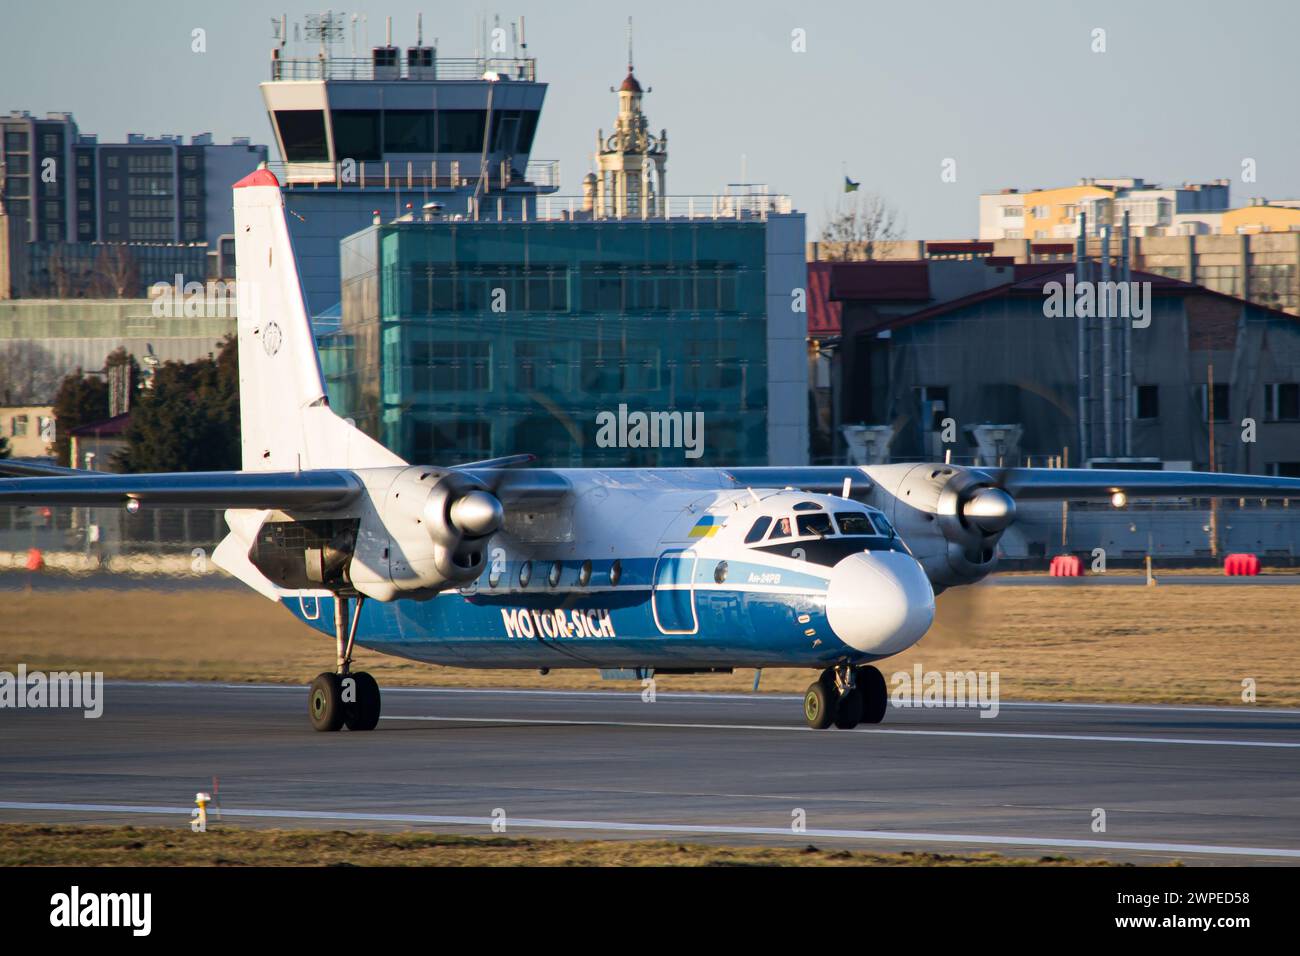 Ukrainian airline's Motor Sich Antonov An-24RV regional aircraft taxiing for takeoff at Lviv Airport during golden hour Stock Photo